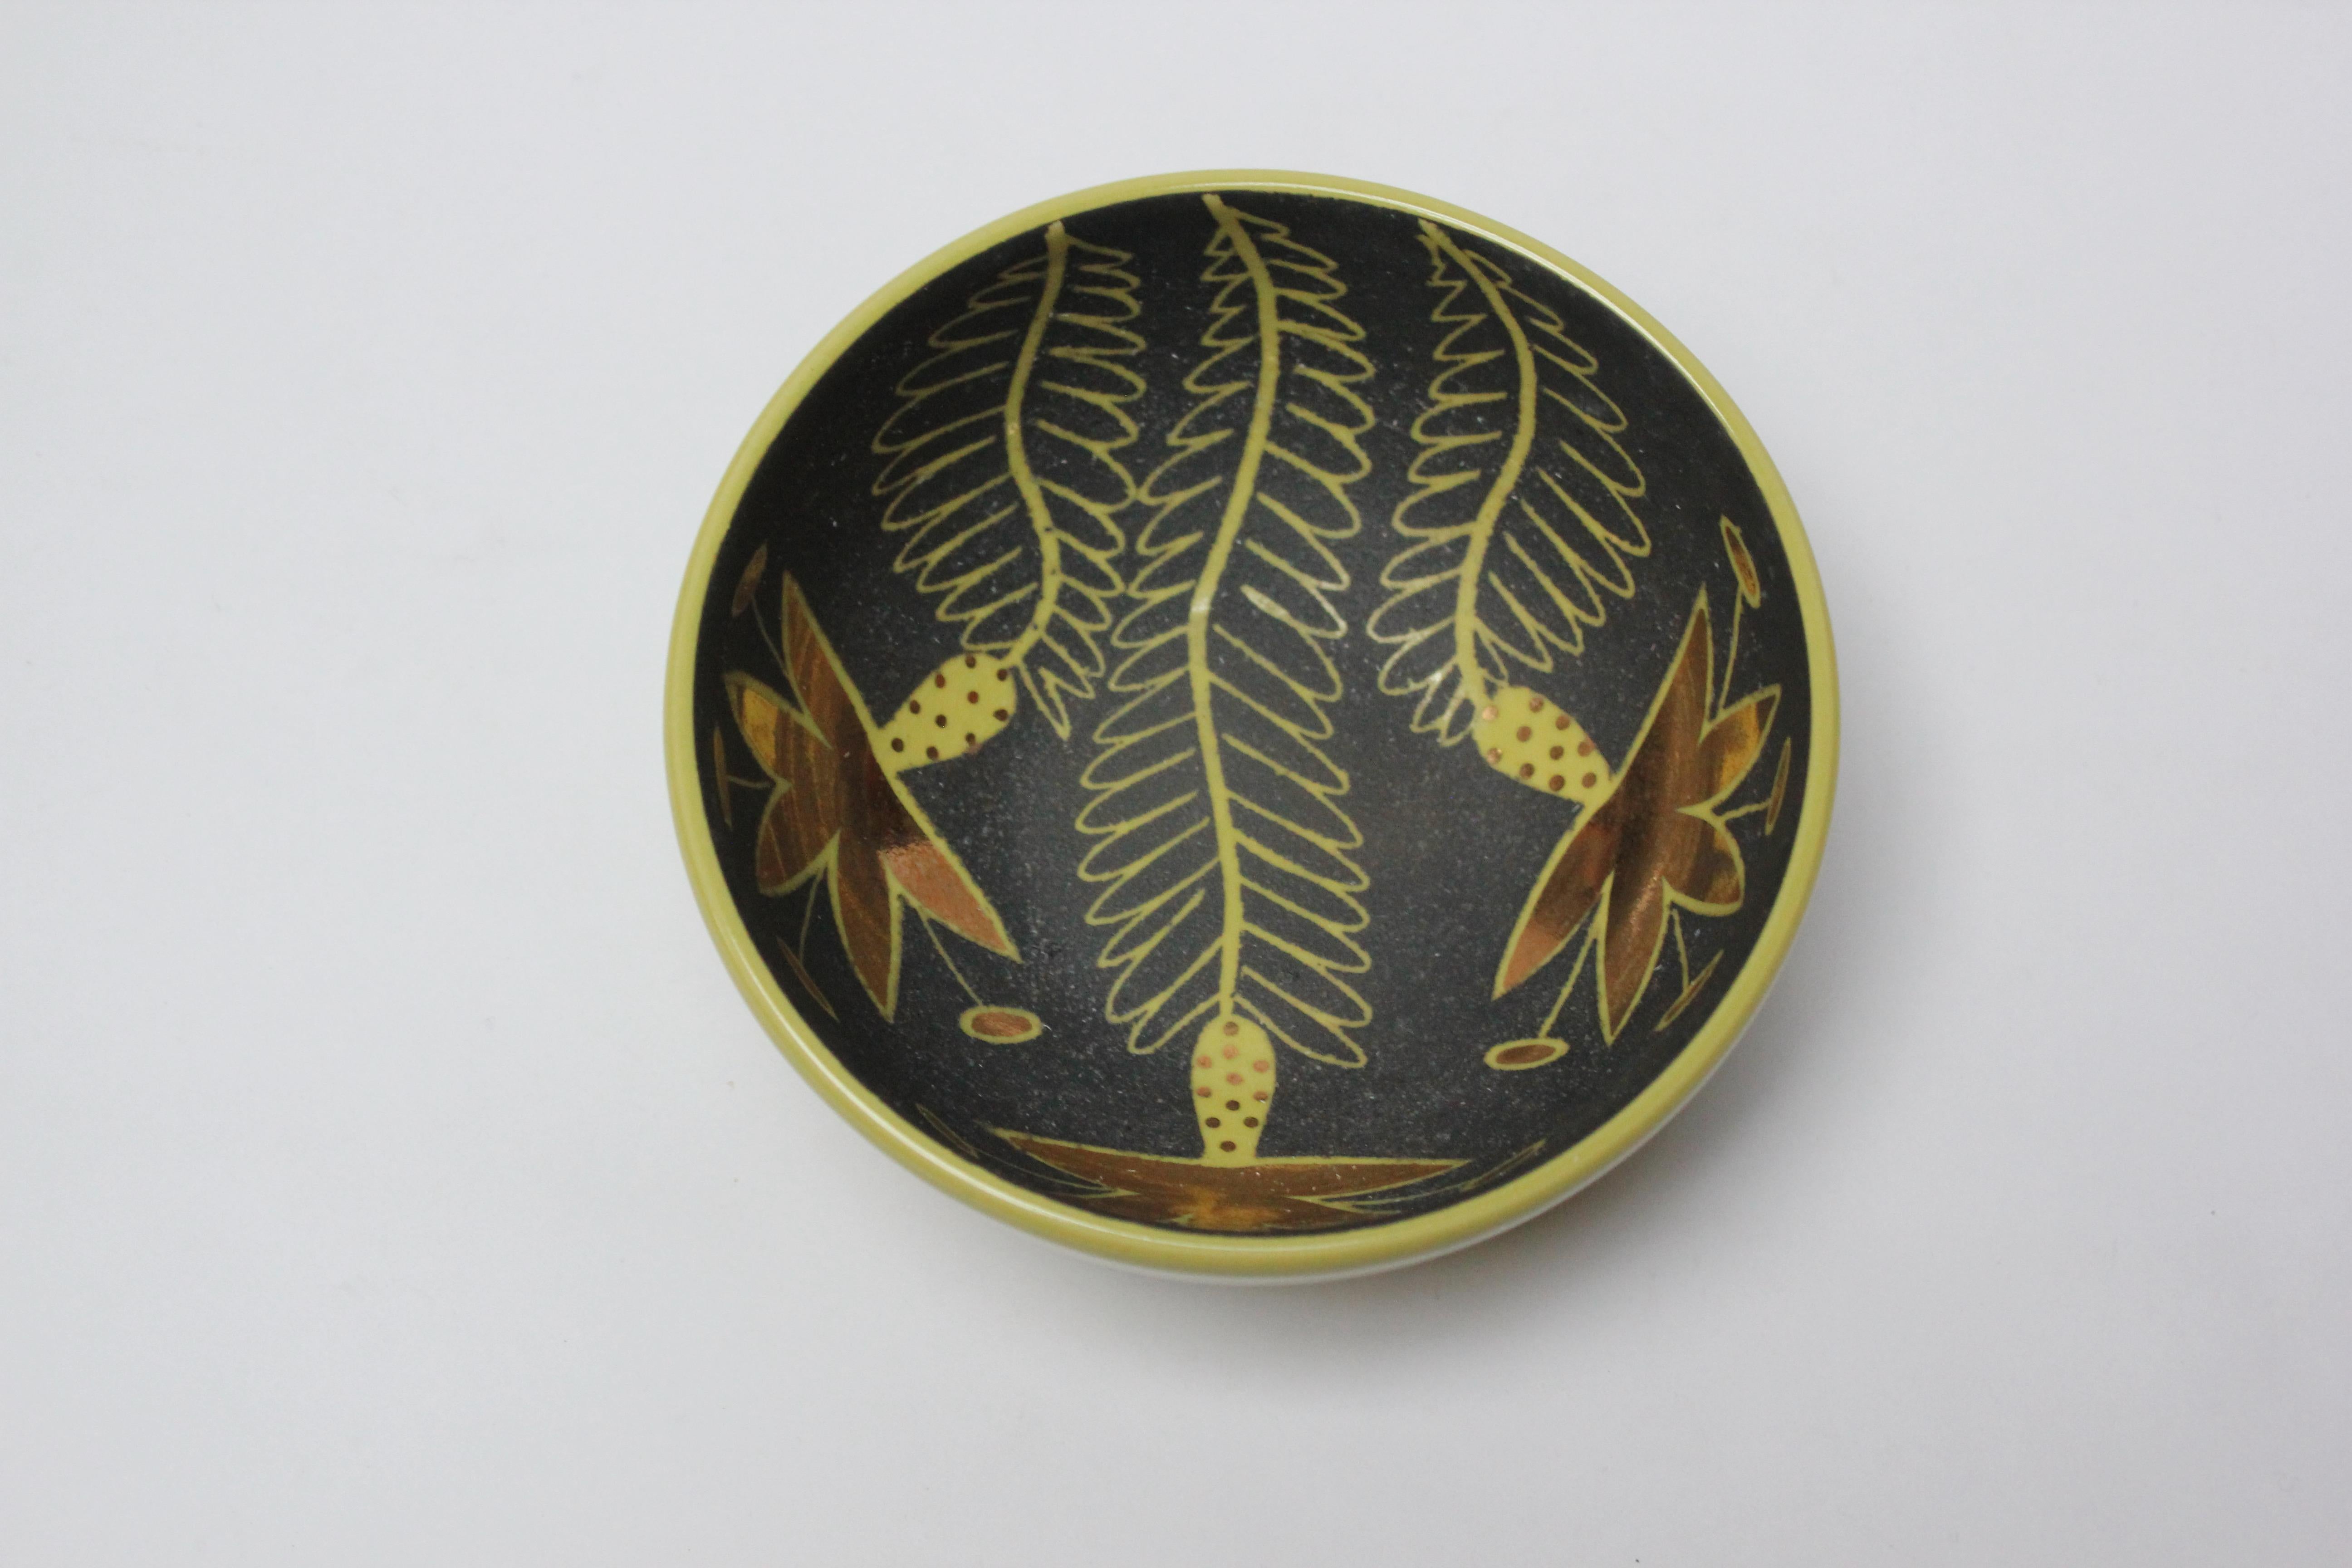 1940s hand-painted ceramic decorative bowl with leaf motif by Waylande Gregory in chartreuse and slate gray (almost black) with gold leaf accents. 
Small size: 5.5